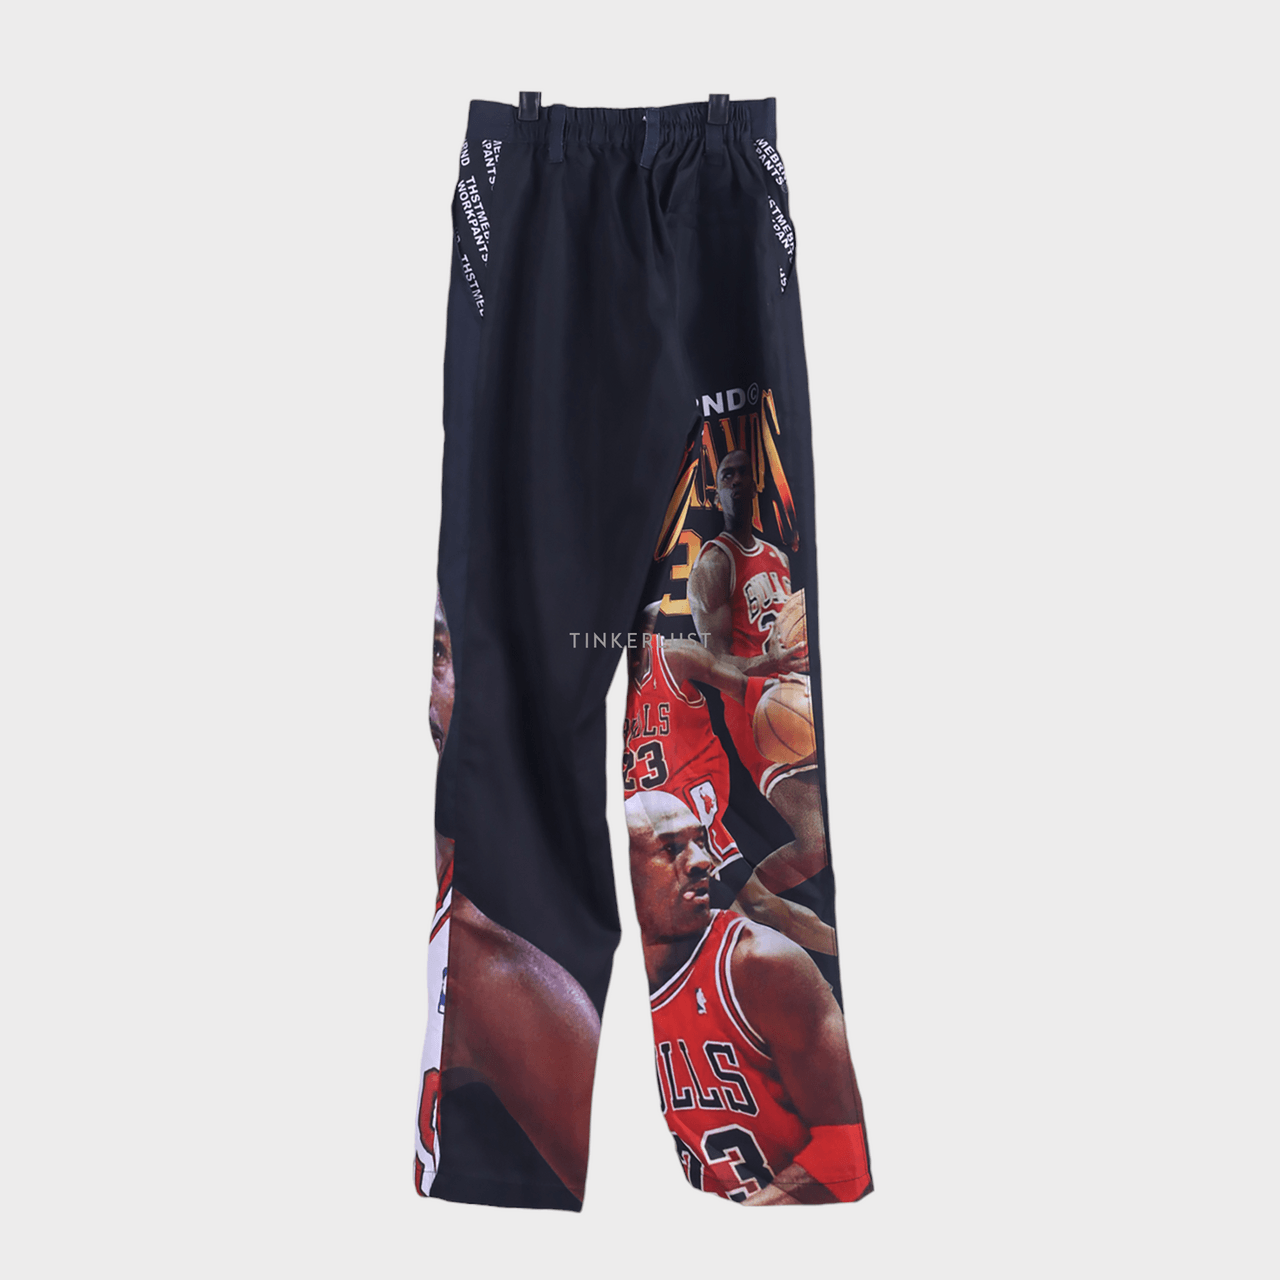 Private Collection Black Printed Long Pants